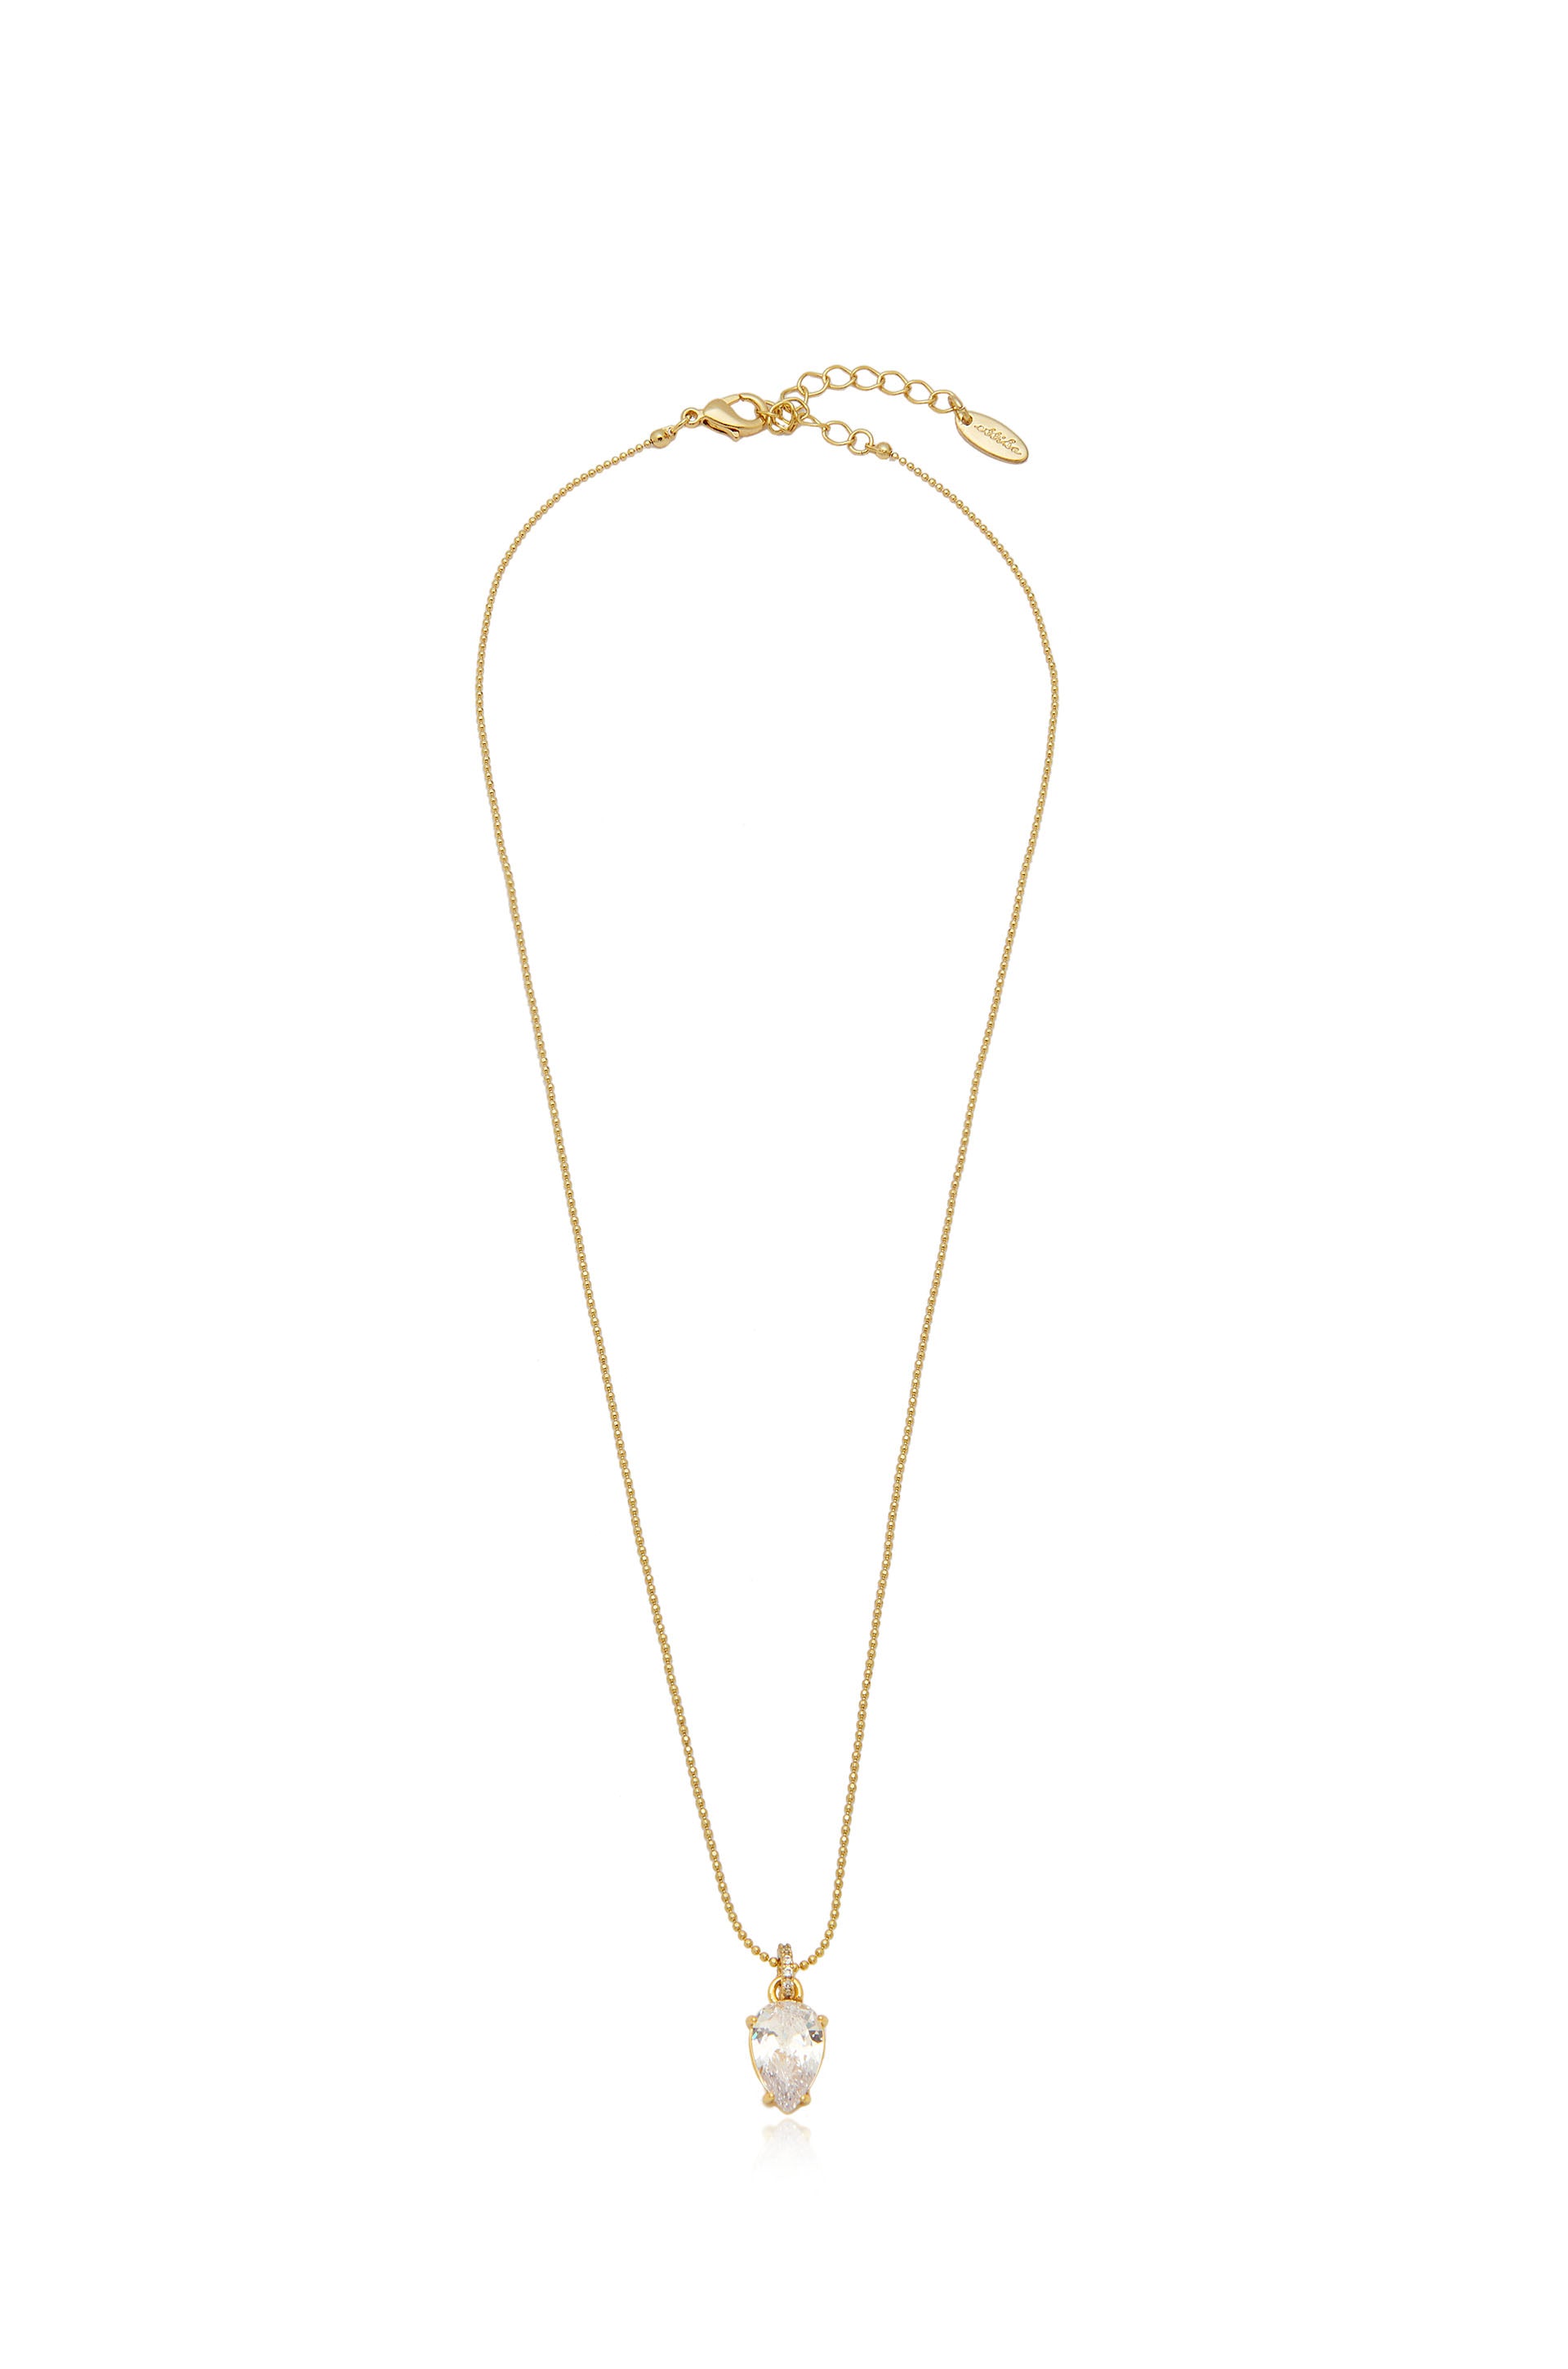 Thin and Delicate 18k Gold Plated Crystal Pendant Necklace